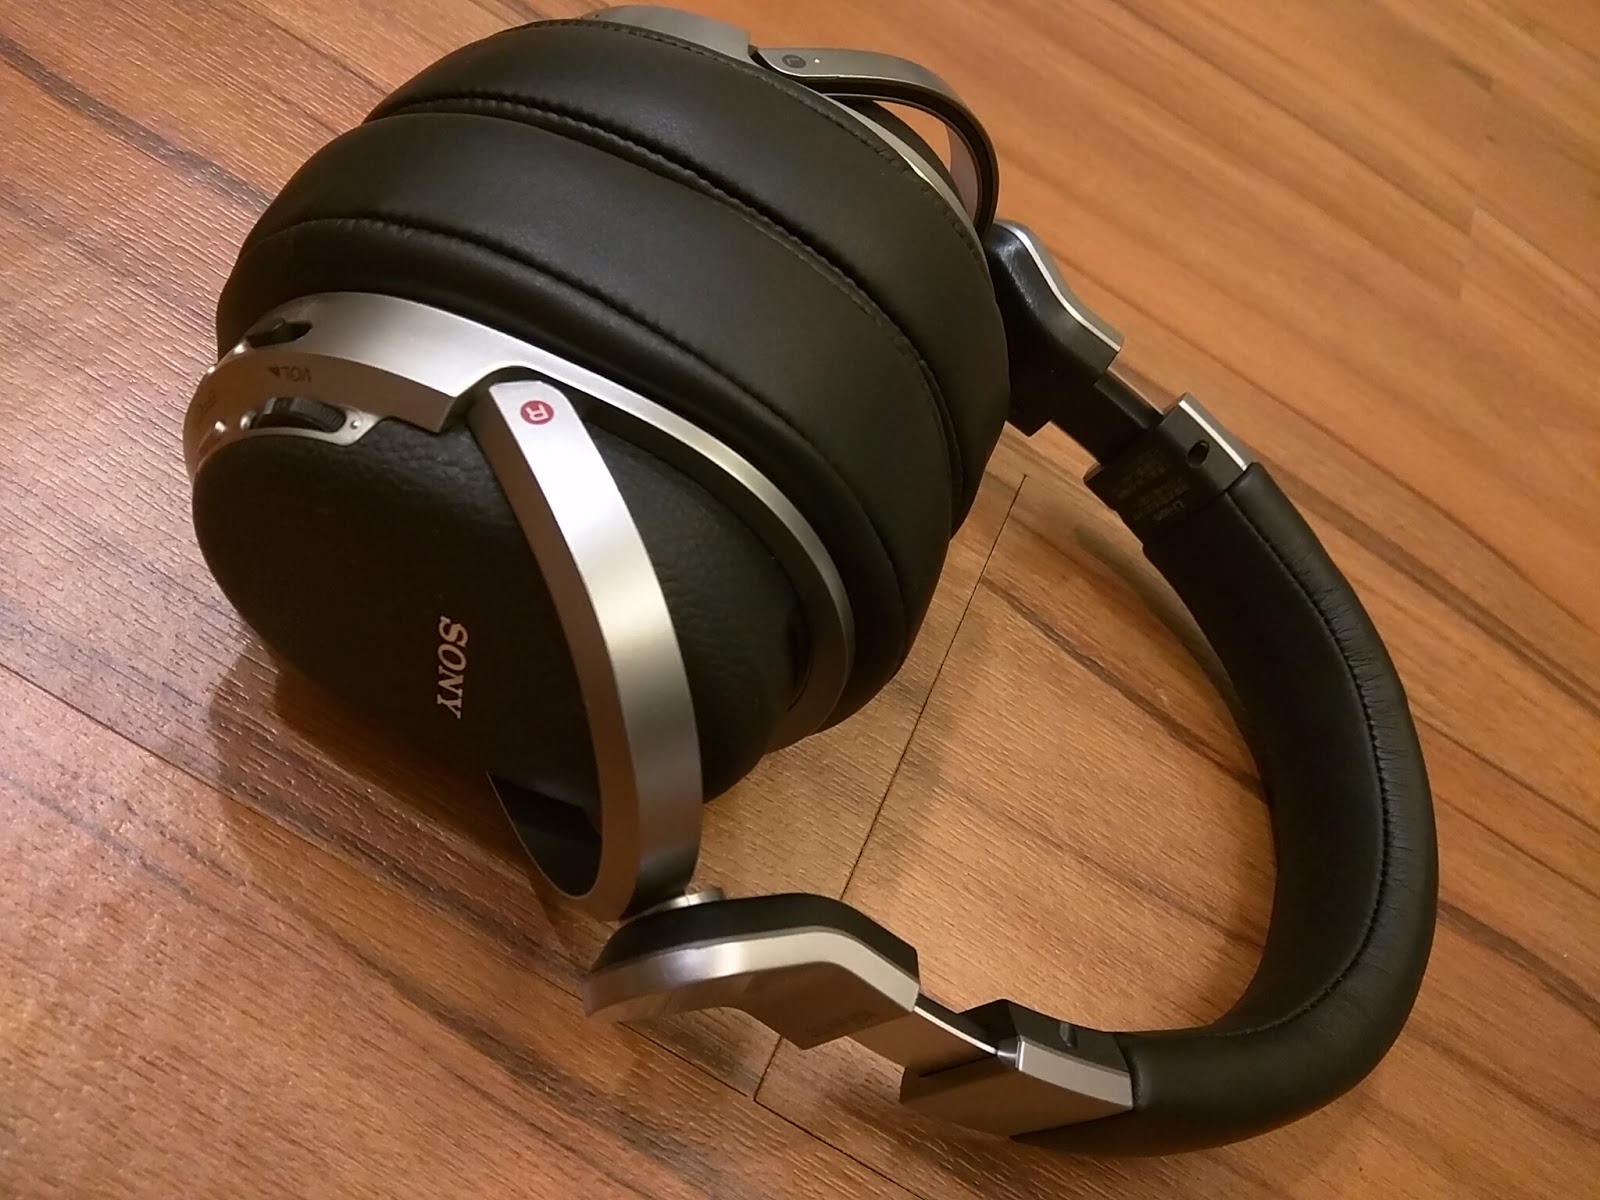 House in the Deep: Sony MDR-HW700DS